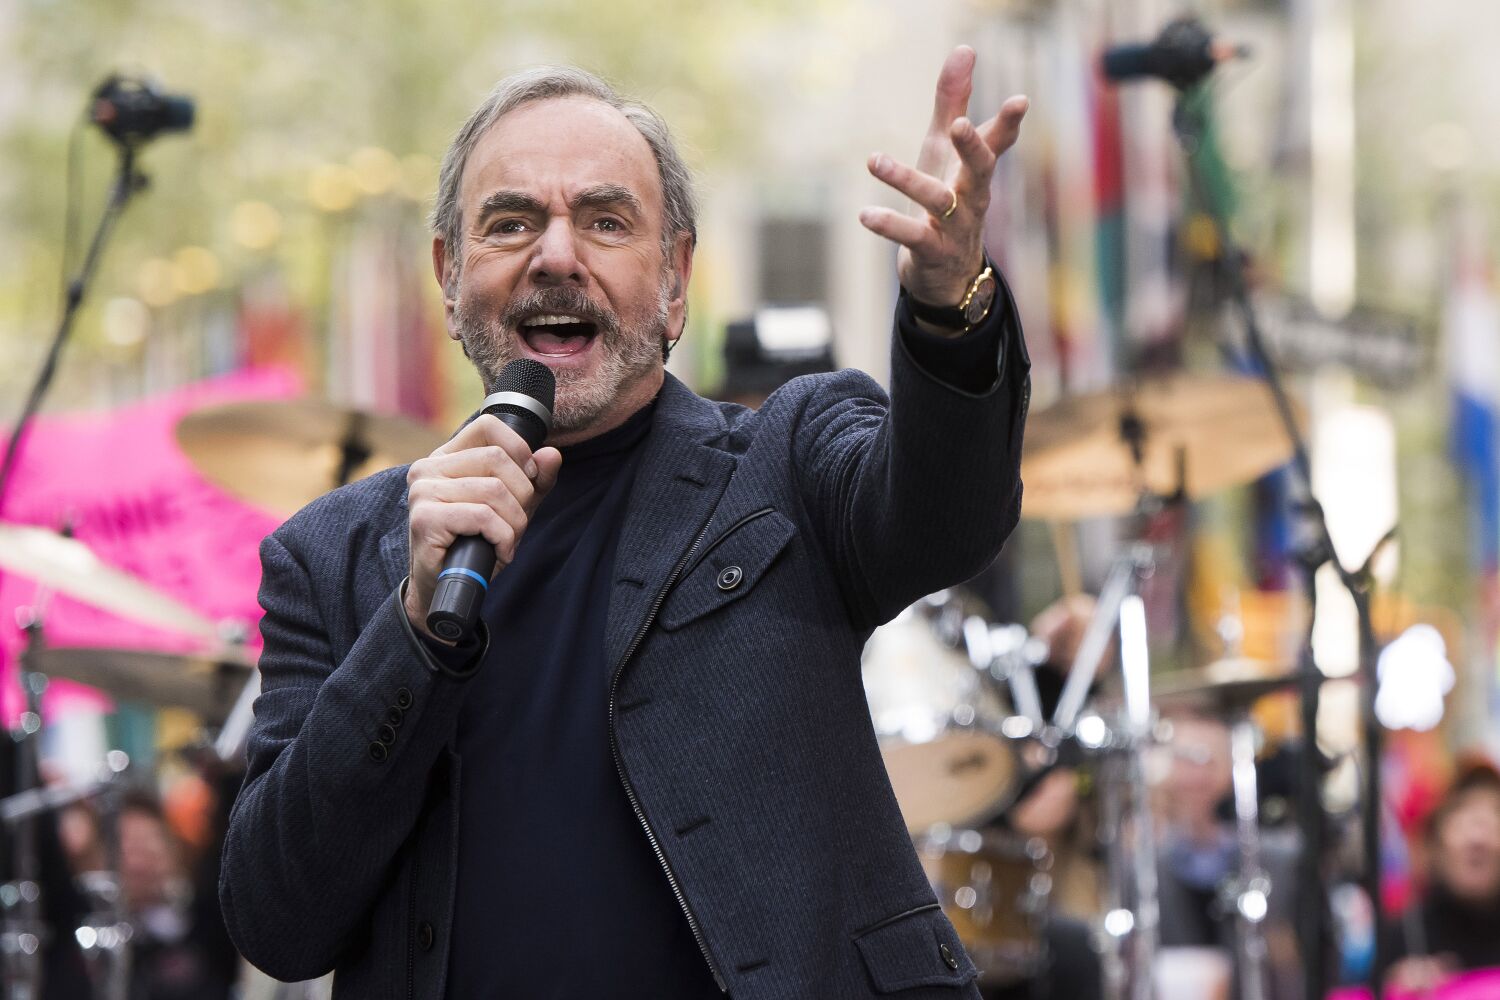 It took Neil Diamond years to accept his Parkinson's diagnosis: 'I'm still doing it'